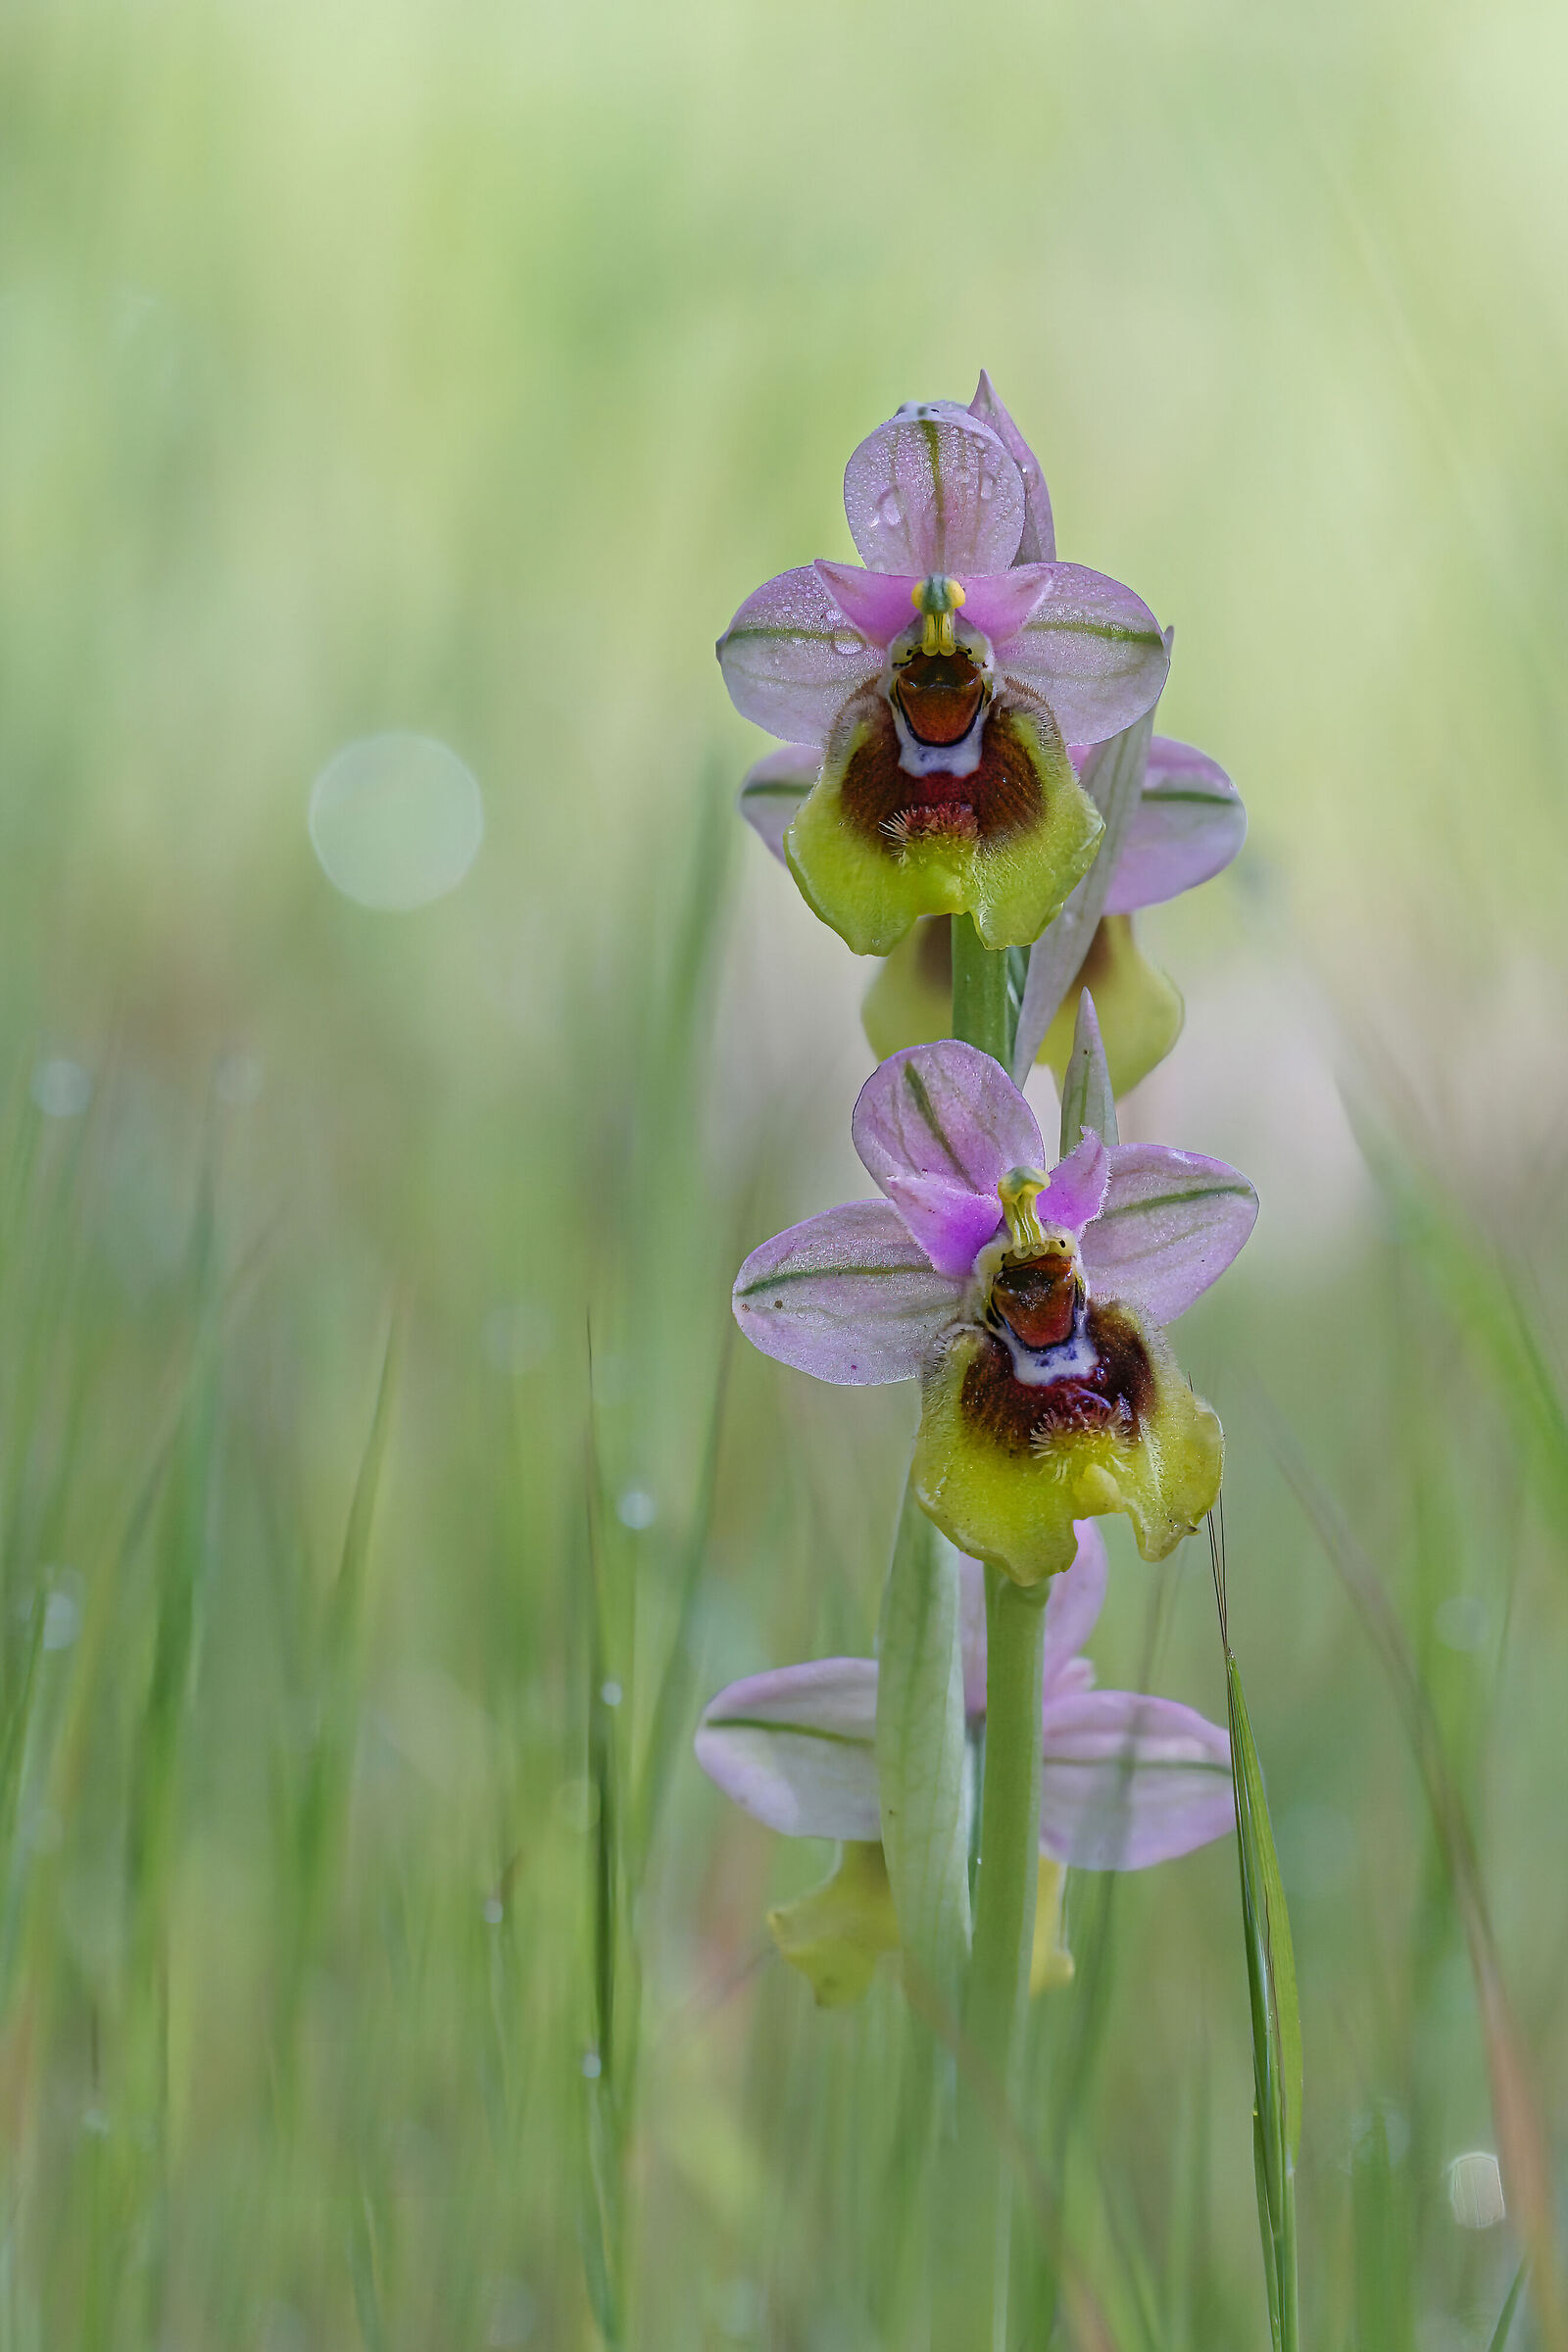 Small wild orchid "Ophrys tenthredinifera"...